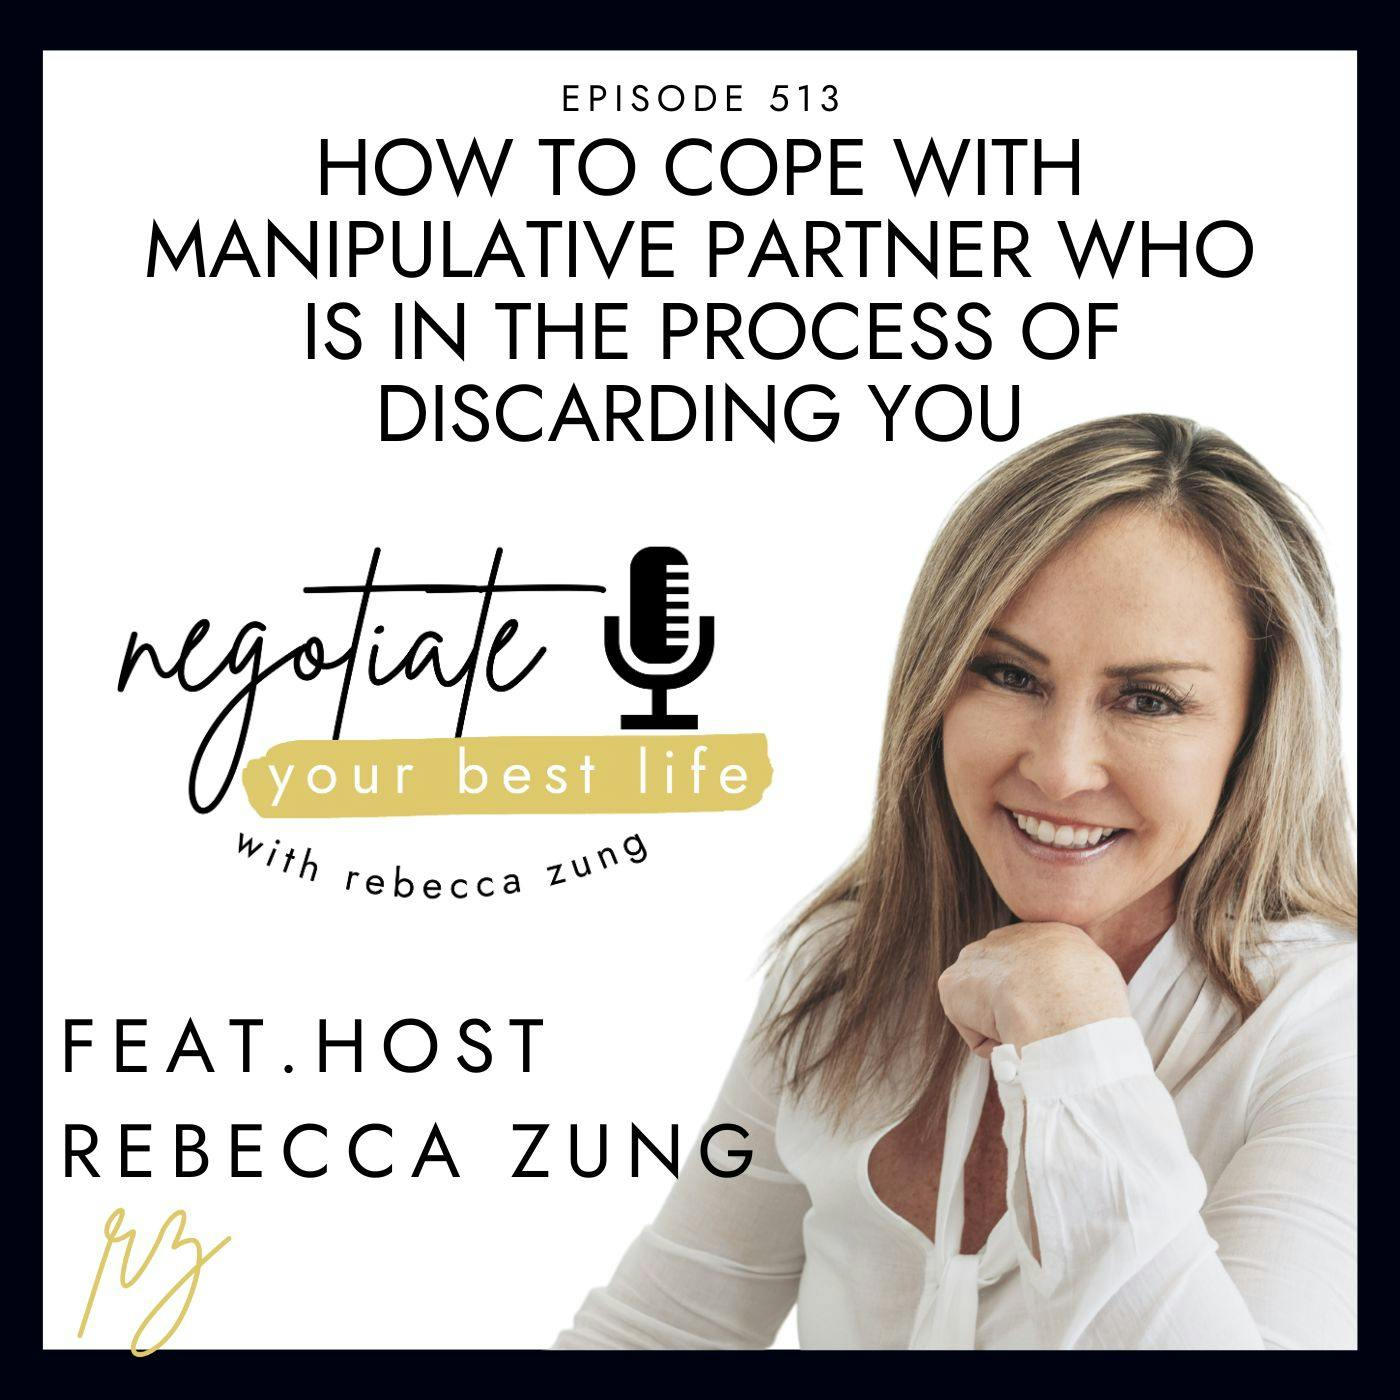 How To Cope With Manipulative Partner Who Is In The Process Of Discarding You with Rebecca Zung on Negotiate Your Best Life #513